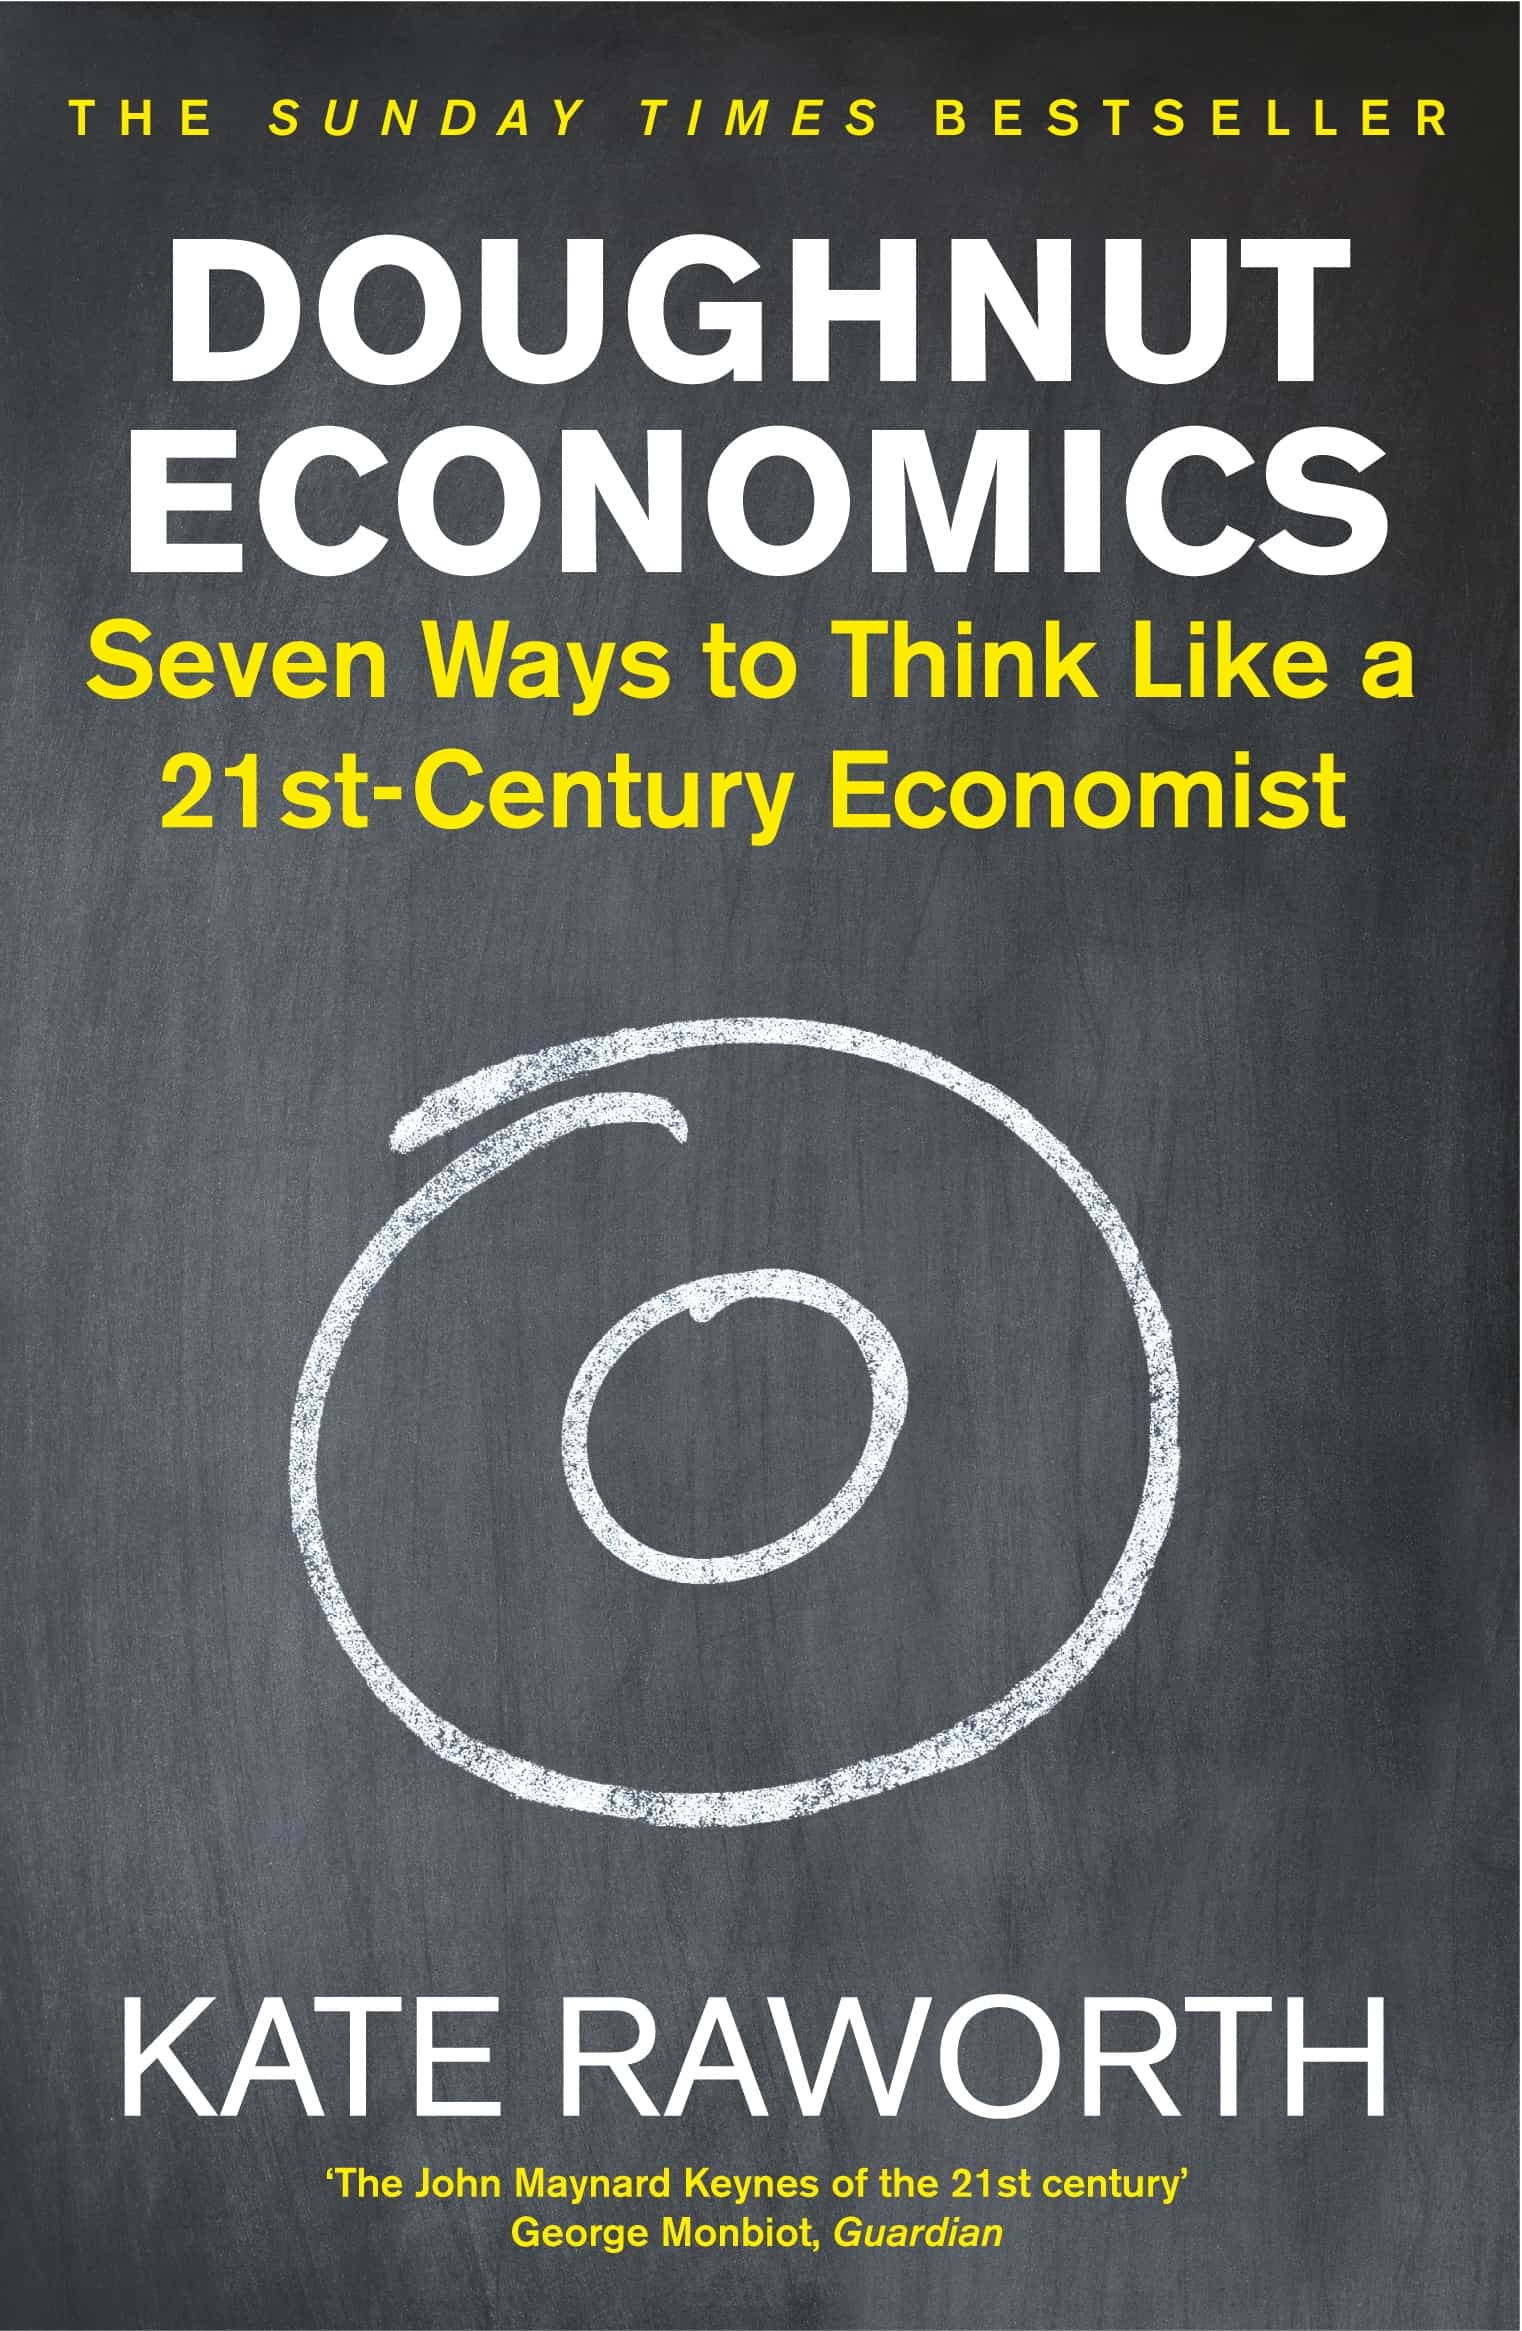 Book cover of 'Doughnut Economics' by Kate Raworth